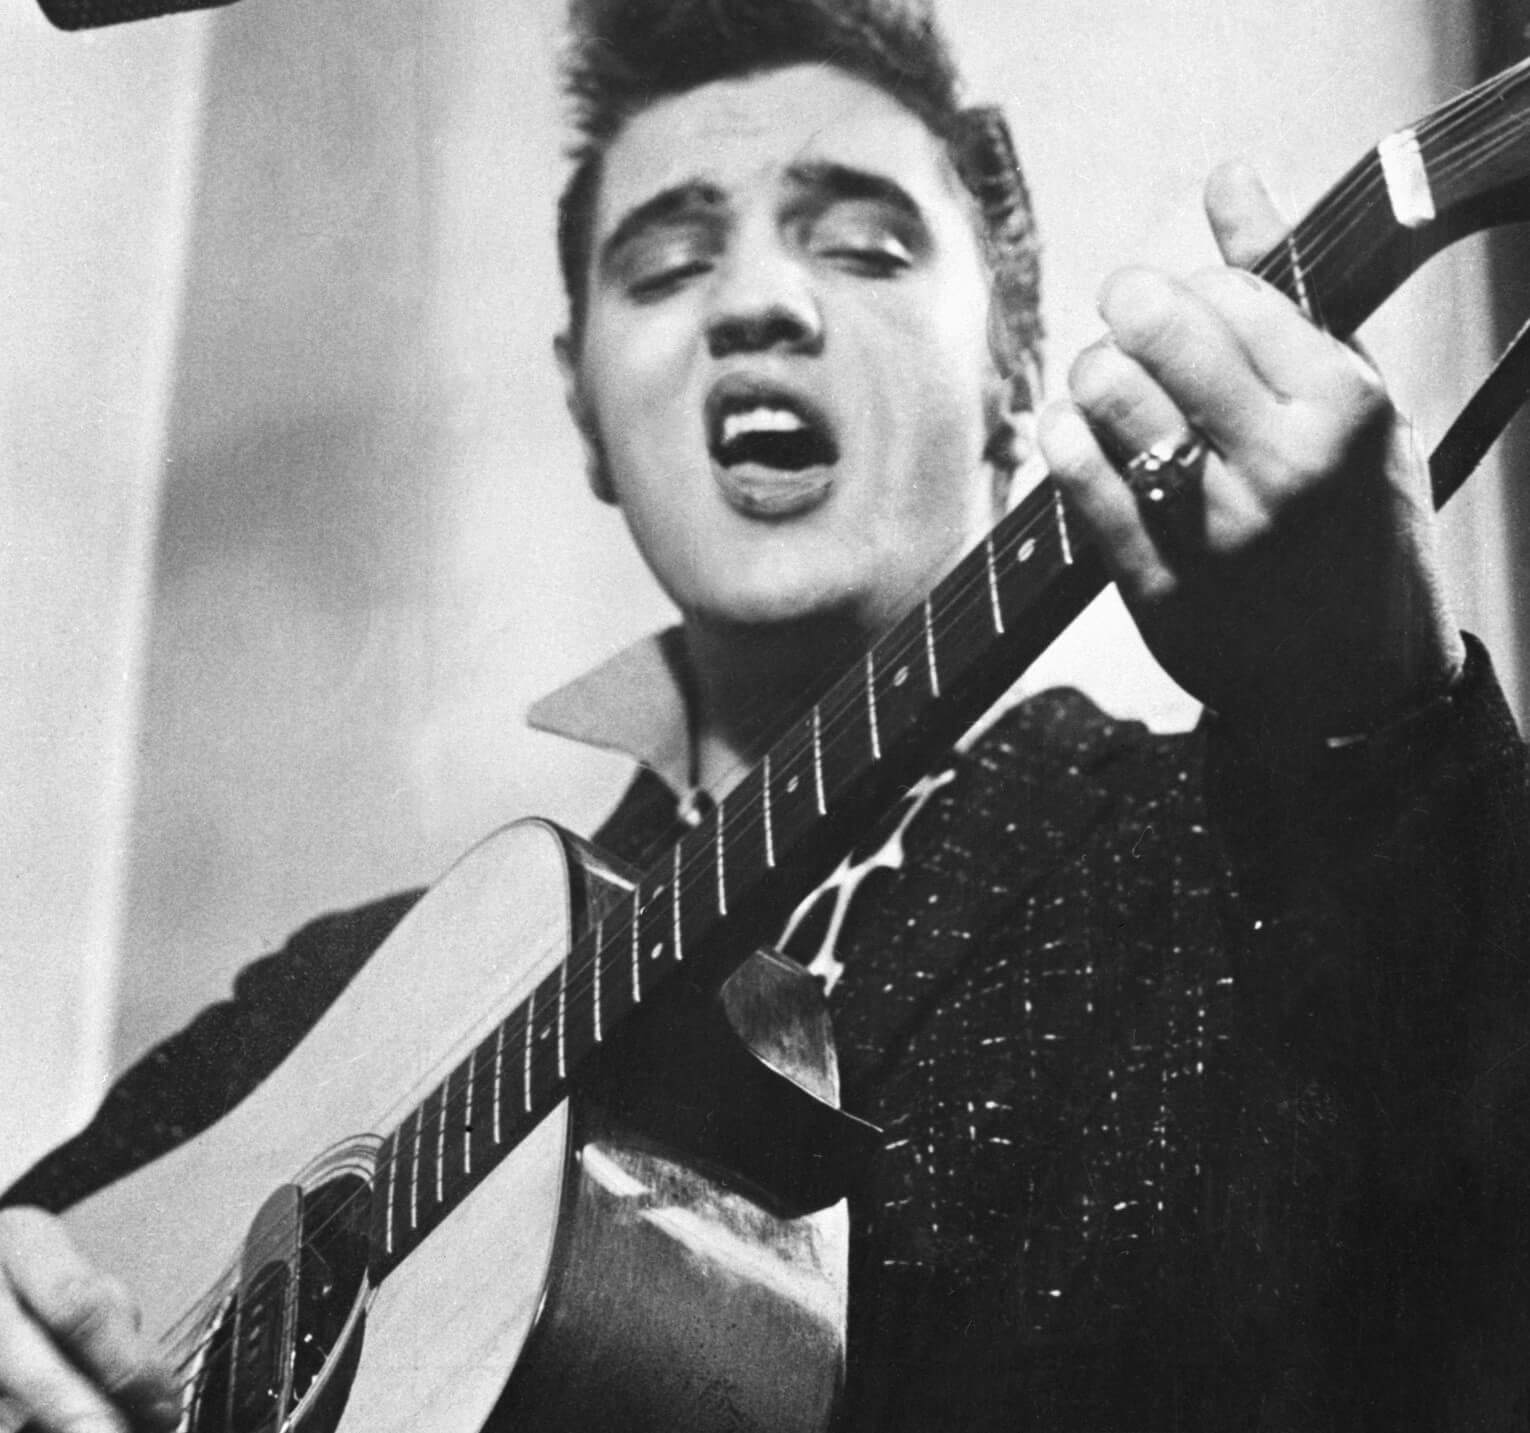 "In the Ghetto" singer Elvis Presley with a guitar